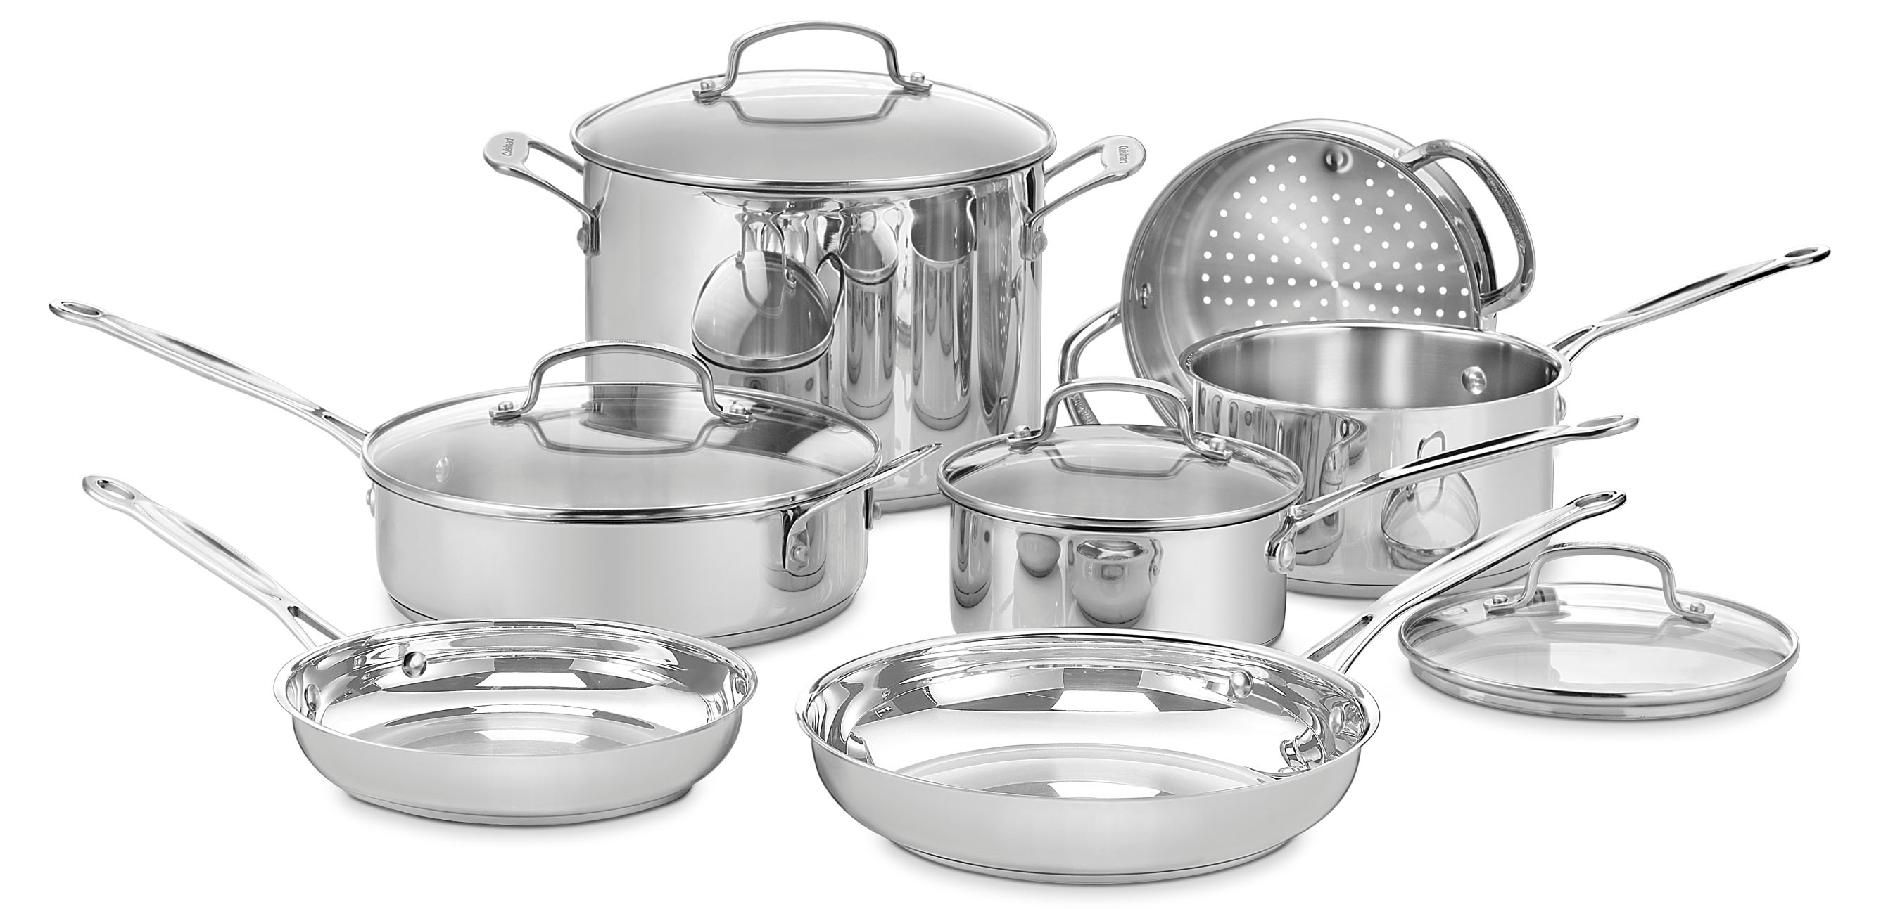 Cuisinart 11pc Stainless Steel Cookware Set Cuisinart Stainless Steel Pots And Pans